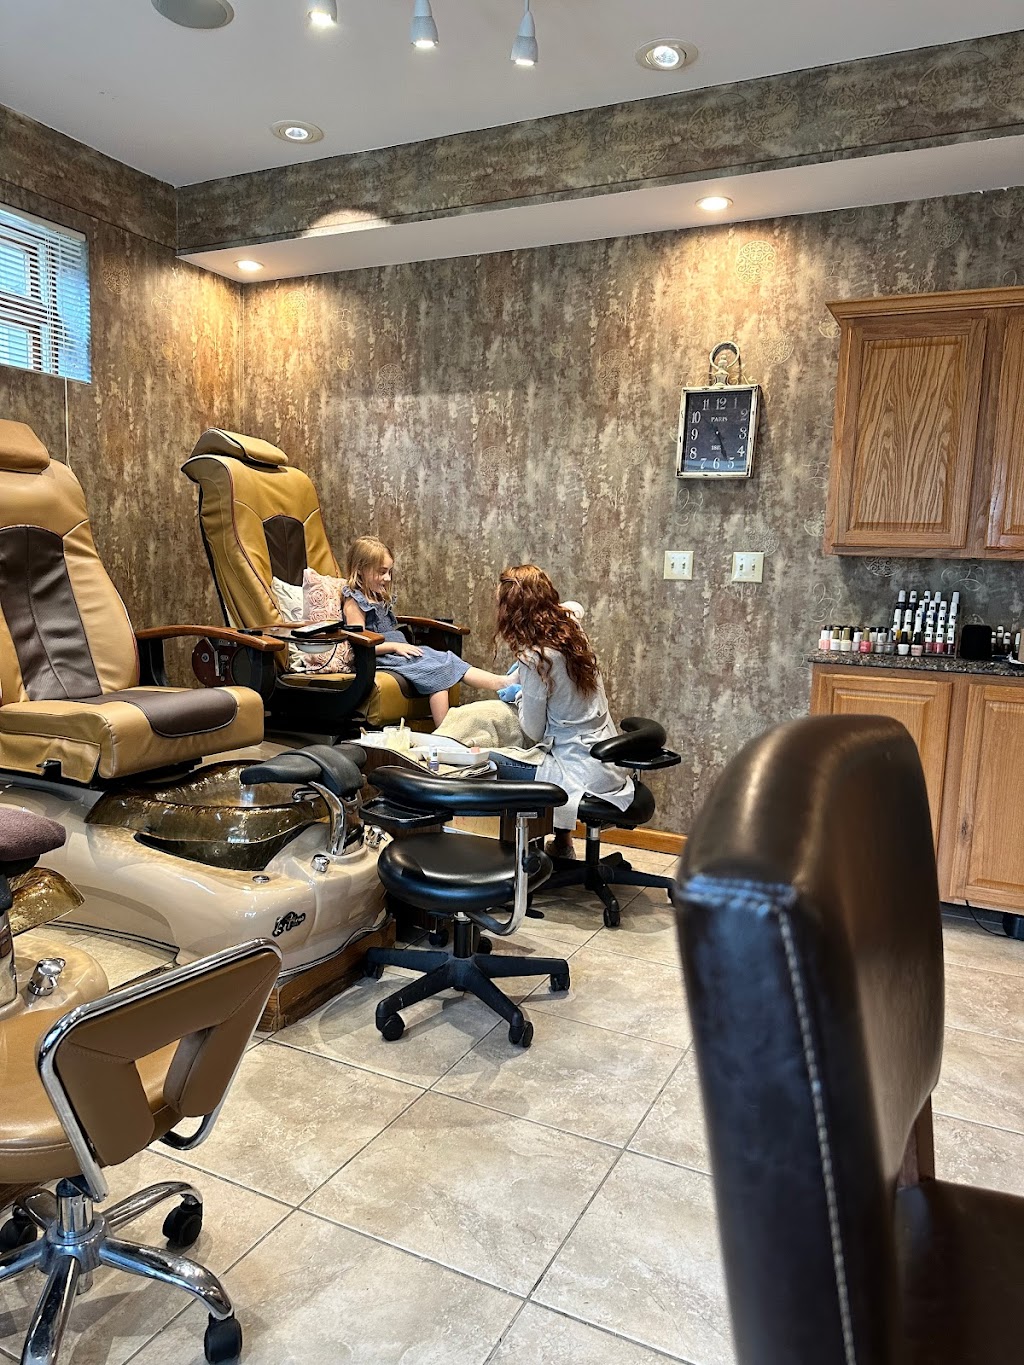 Somers Day Spa & Hair Salon | 36 S Rd, Somers, CT 06071 | Phone: (860) 763-4544